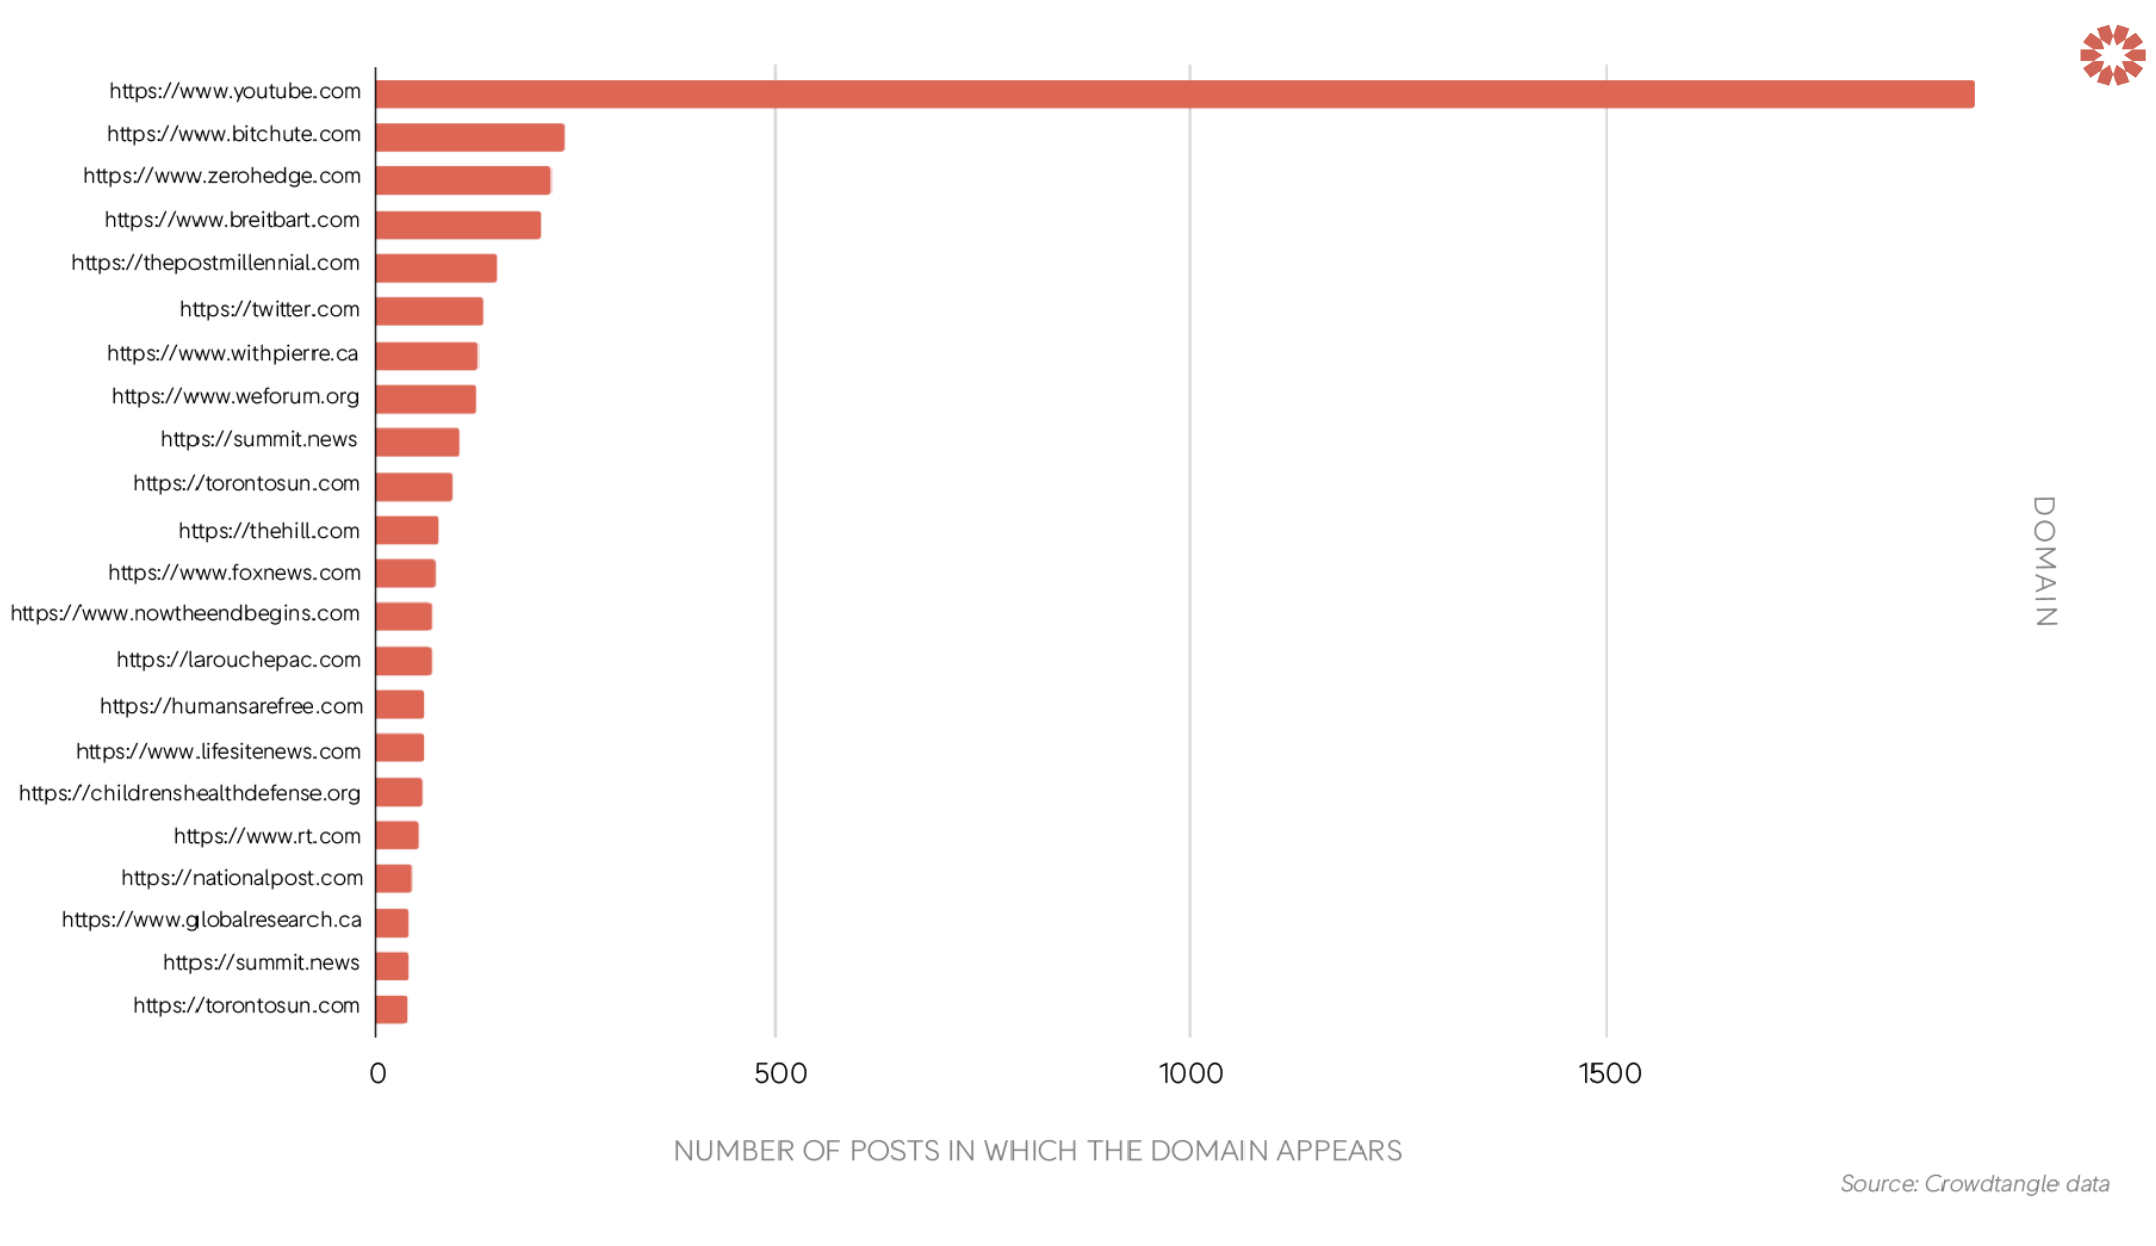 A bar chart showing the number of posts per social media domain. The top result is youtube.com with over 1,500 posts, followed by Bitchute, with around 250, and Zerohedge, with slightly less than that. 